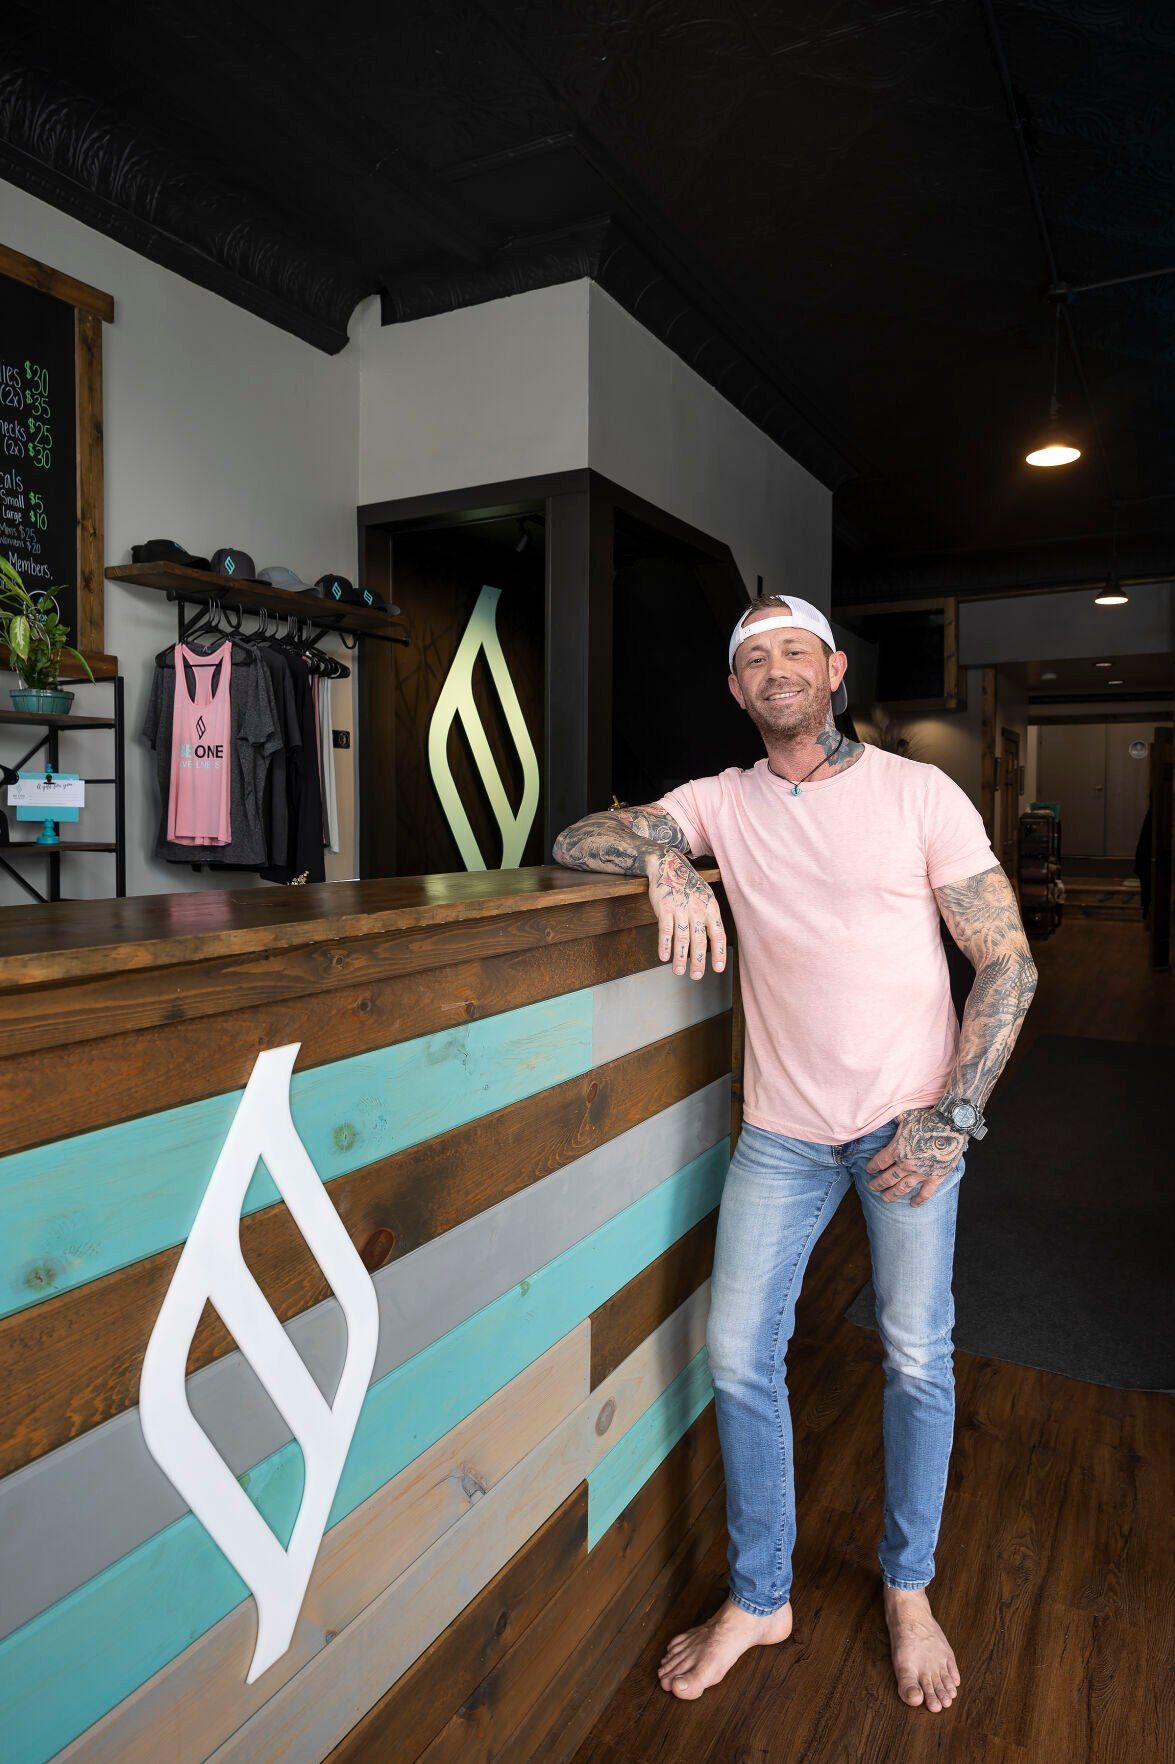 Owner Travis Olson at Be One Wellness in Dubuque.    PHOTO CREDIT: Stephen Gassman